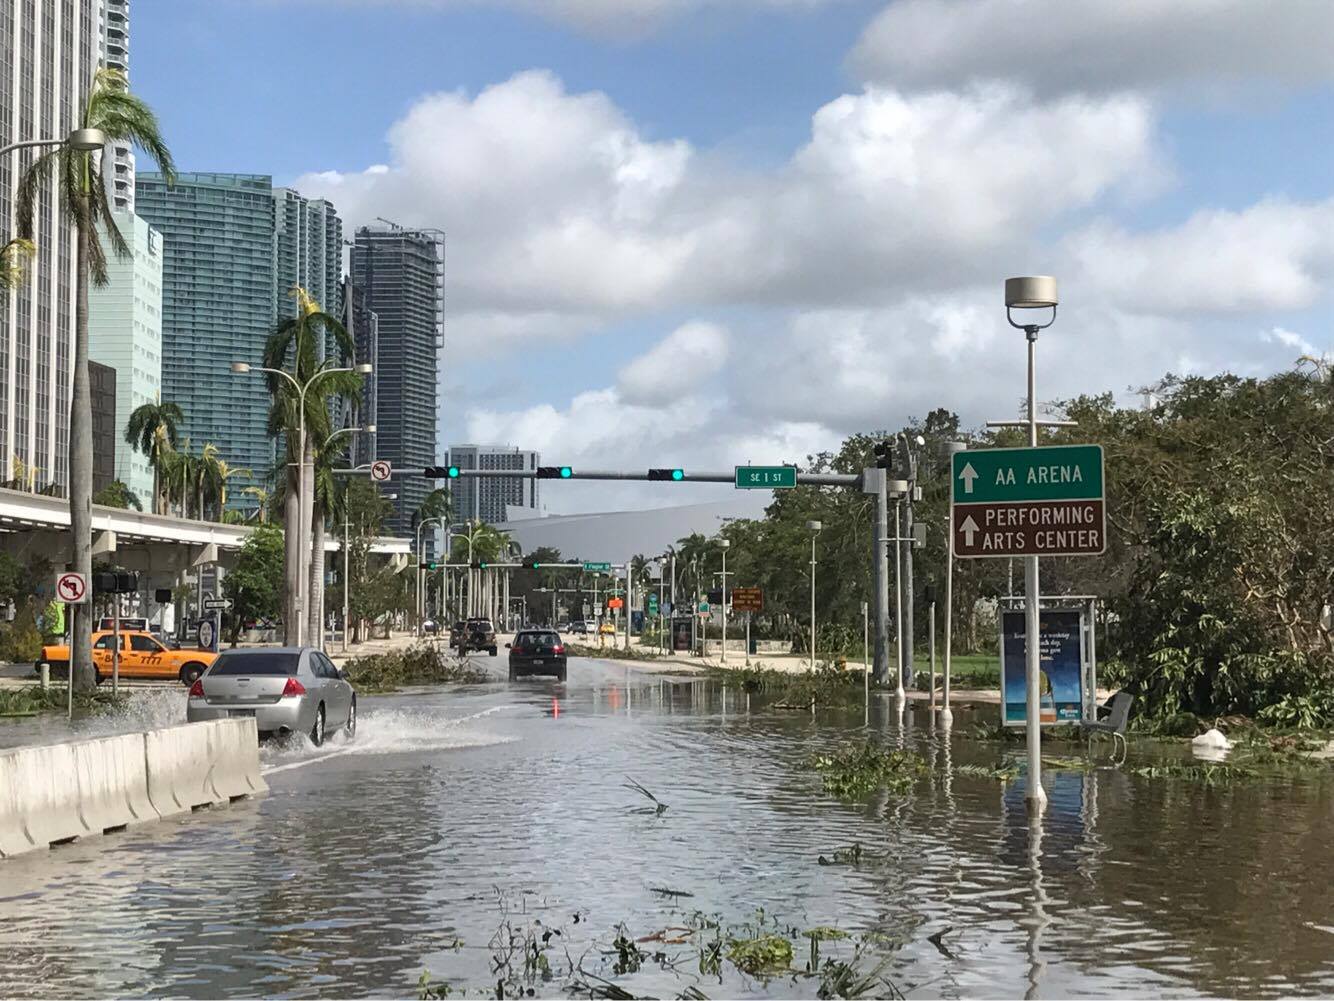 Downtown Miami on Sept. 11, 2017, after it was hit by Hurricane Irma. (The Epoch Times)